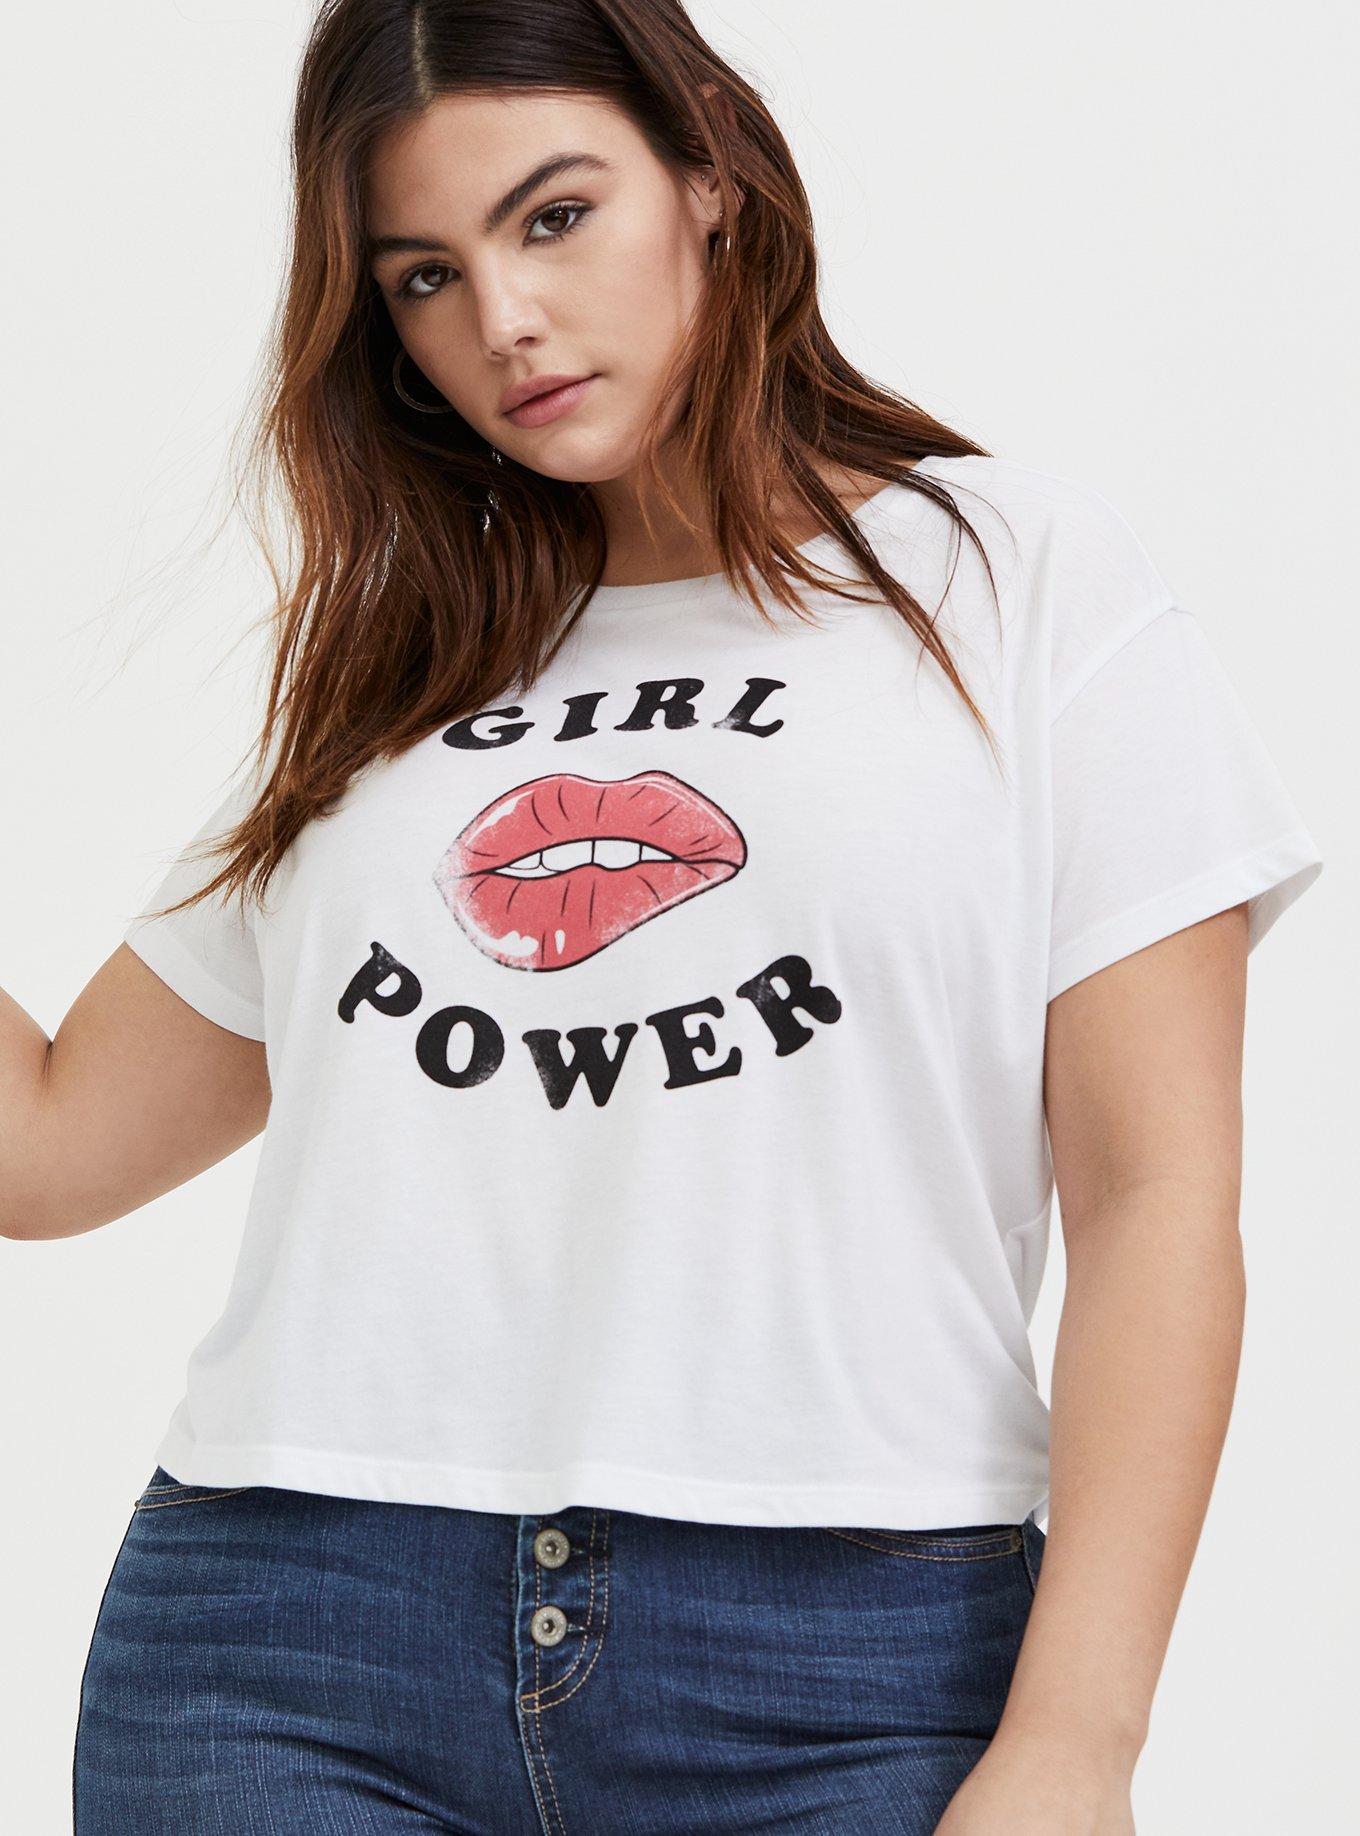 Plus Size - Girl Power White Relaxed Fit Crop Tee - Torrid